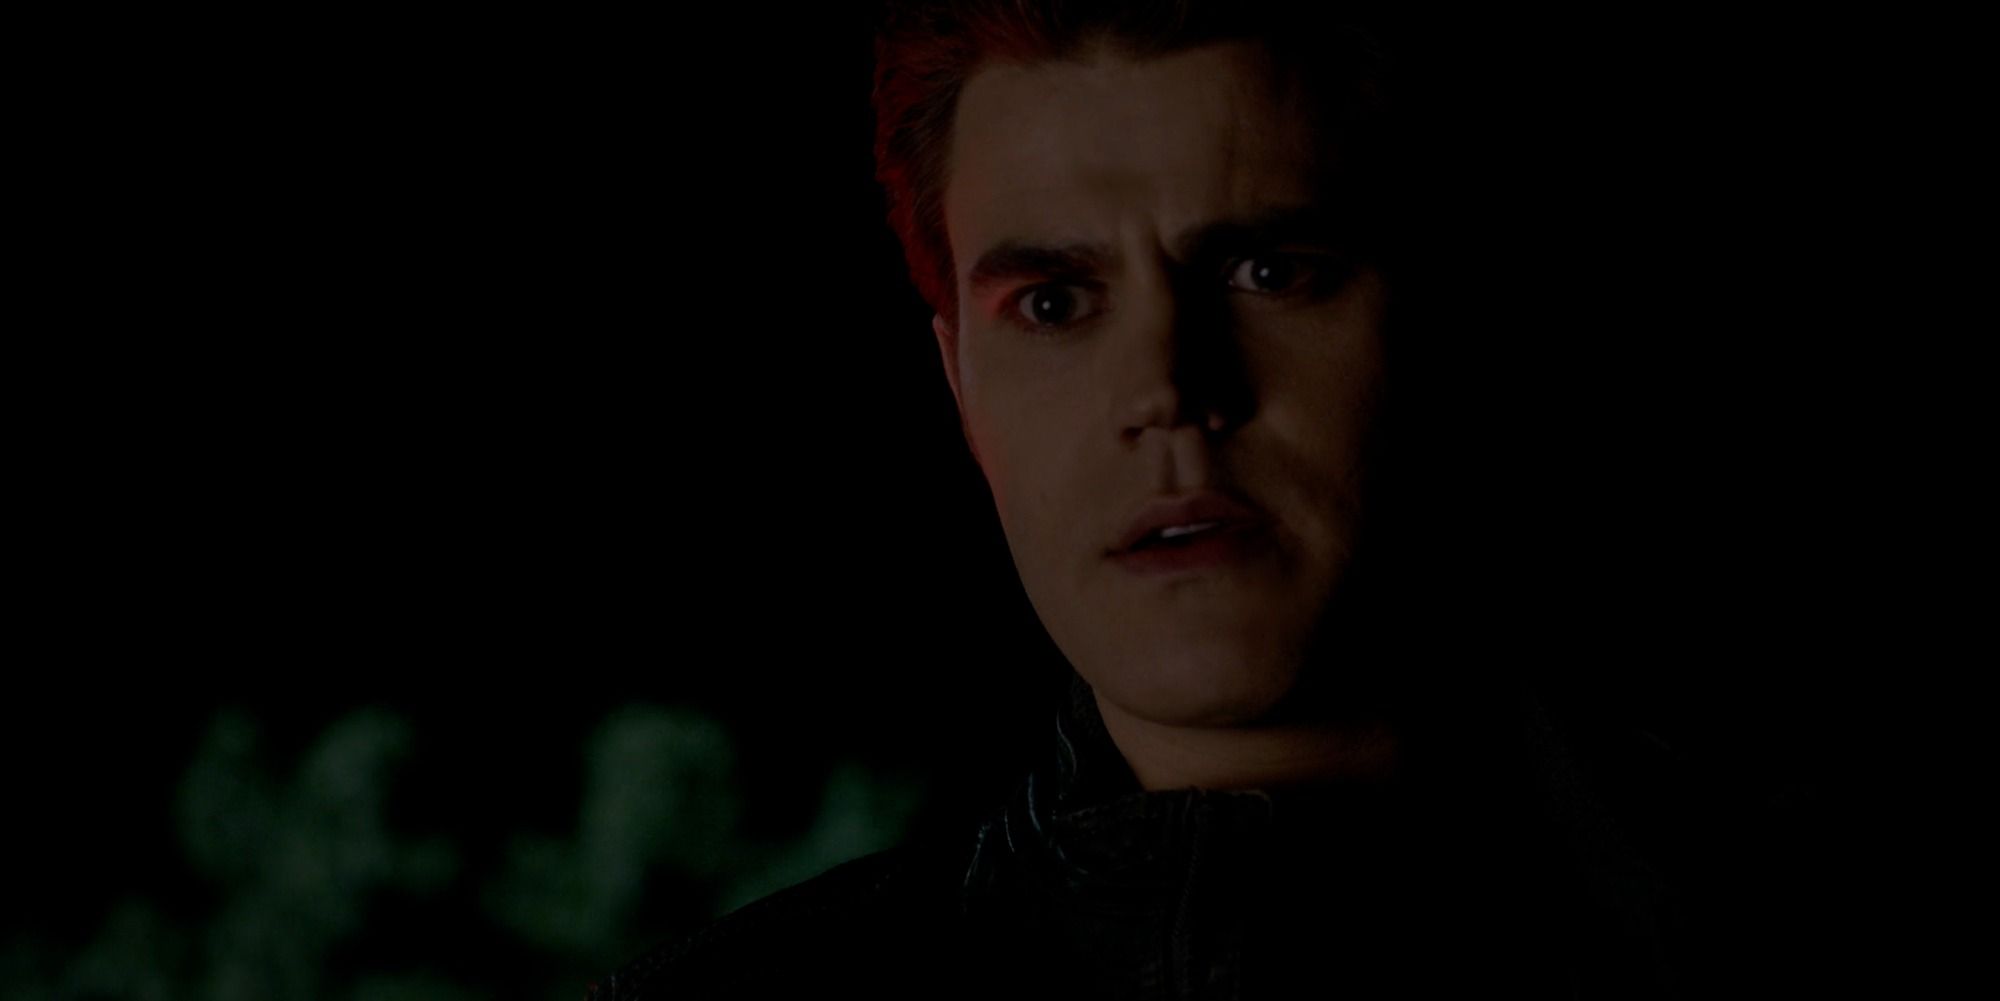 Silas looks exactly like Stefan in The Vampire Diaries